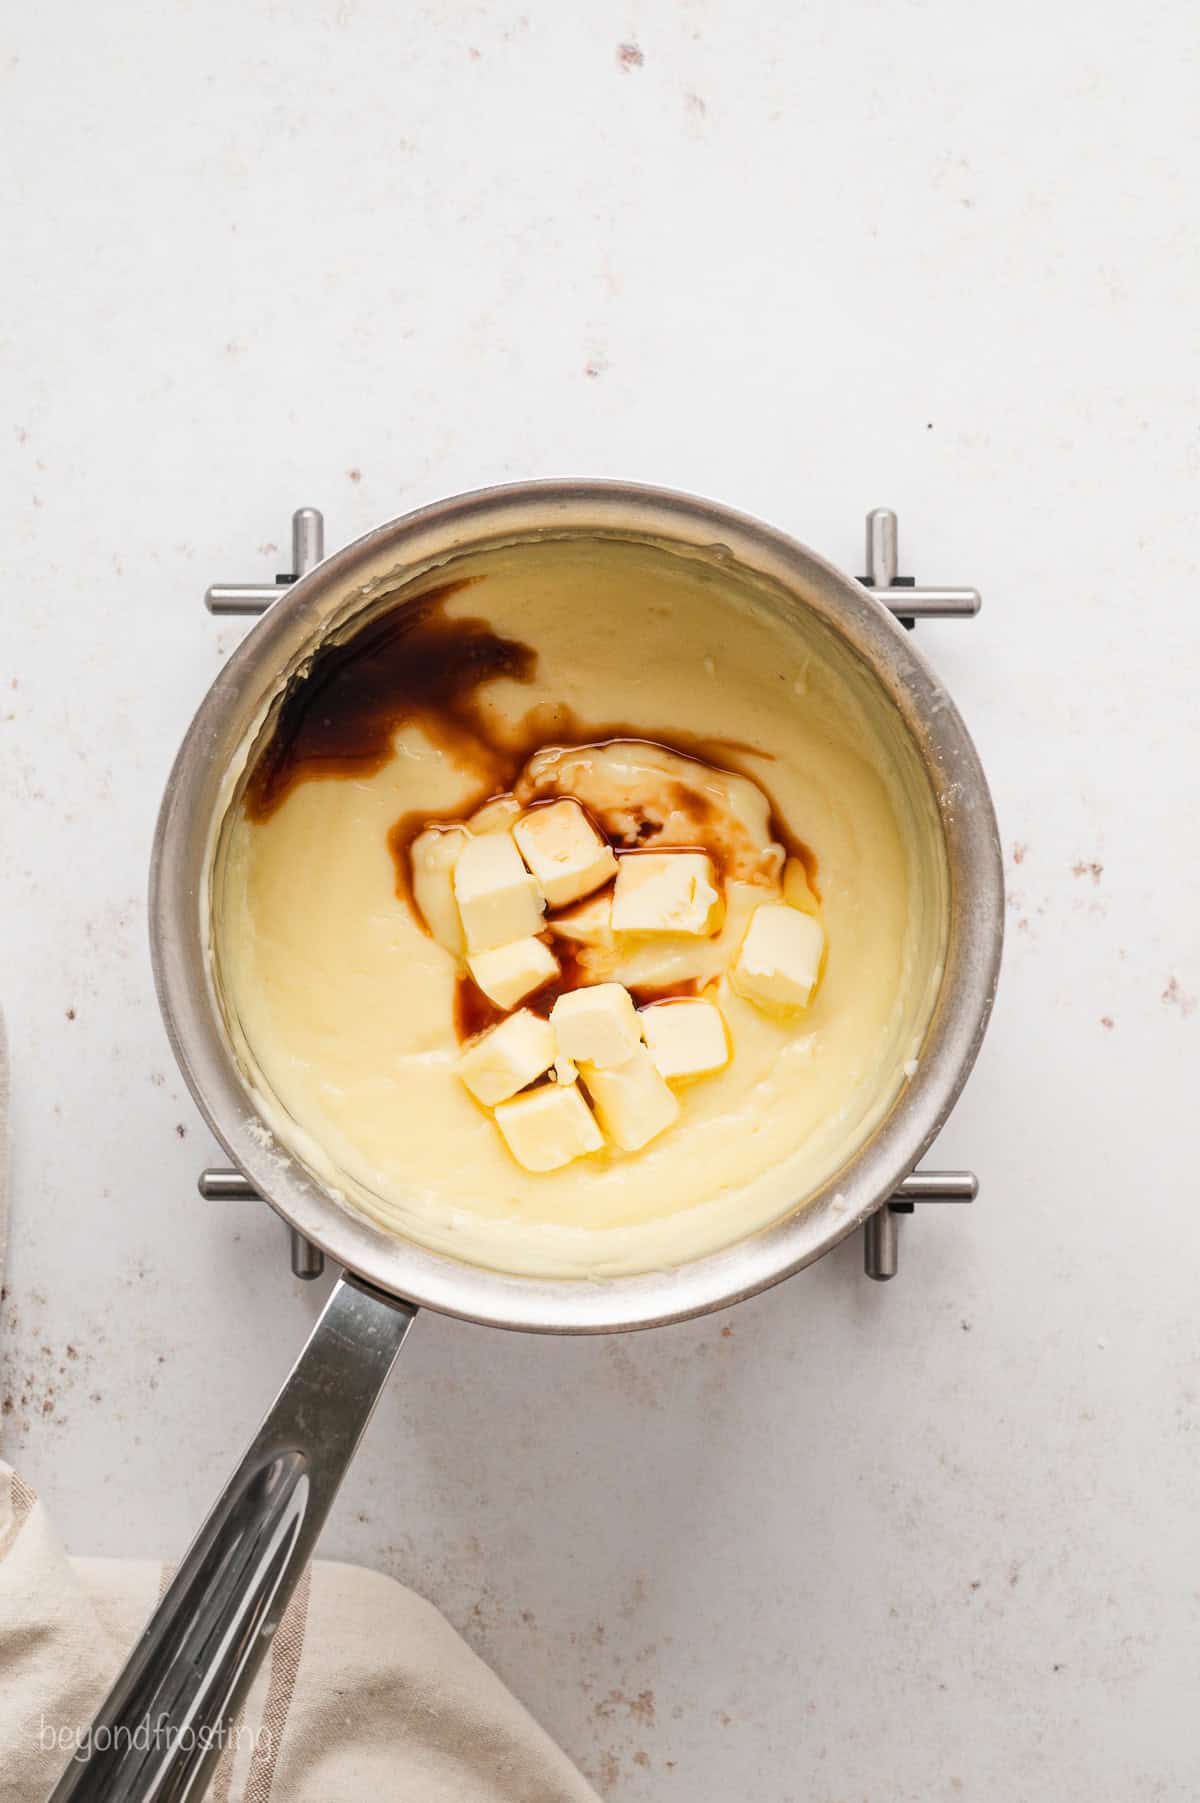 Vanilla extract and cubes of butter added to warm pudding in a saucepan.